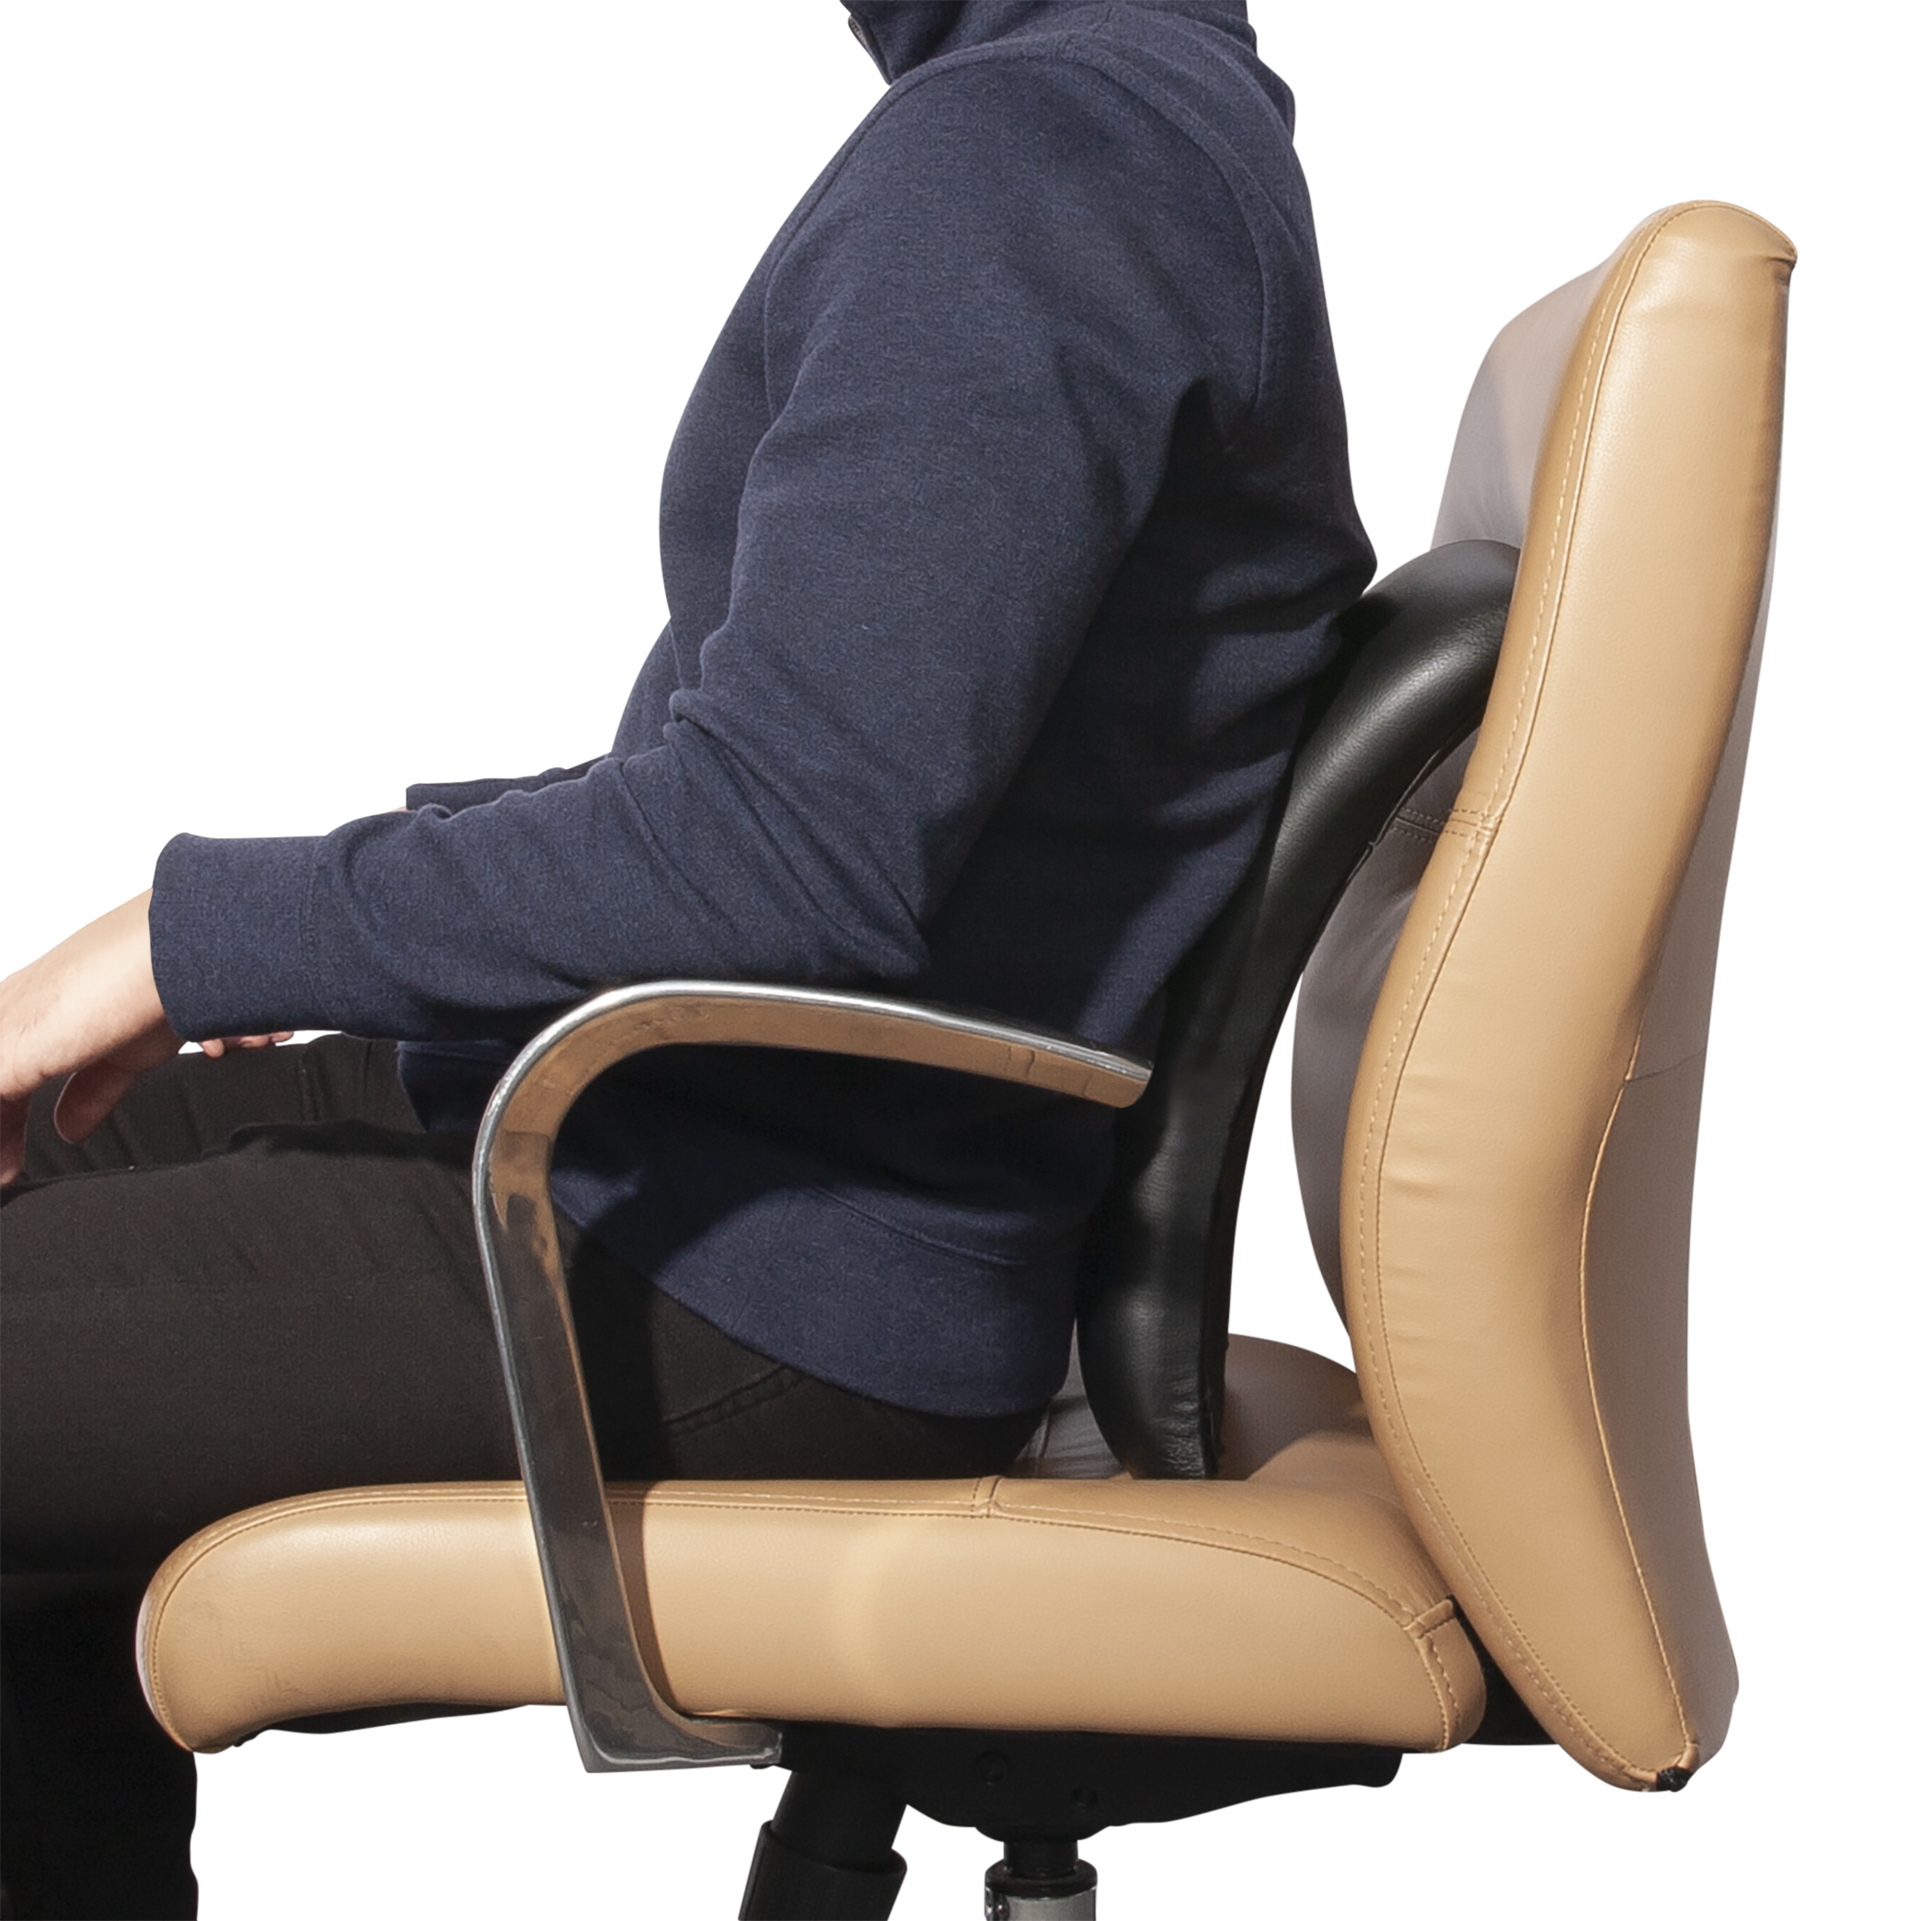 North American Healthcare - Arched Back Stretcher - Great for back stretch and usage as a spine board - image 1 of 3